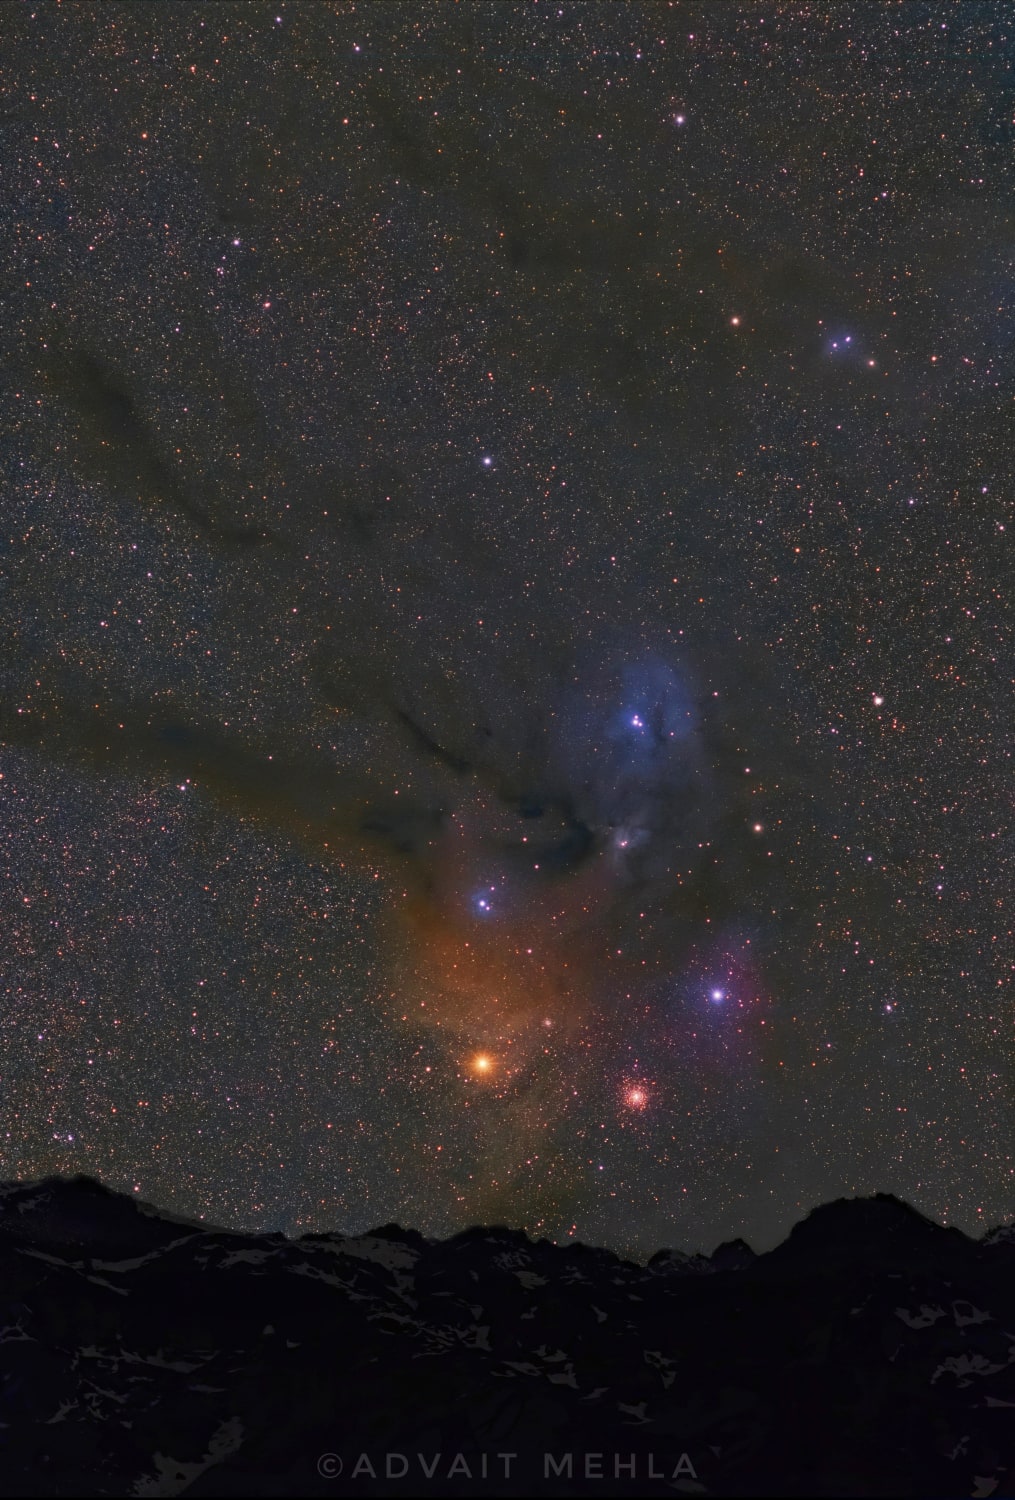 People are usually unaware of how huge objects in the night sky are. Here is an image of the clouds of Rho Ophiuchi setting against the Himalayas.